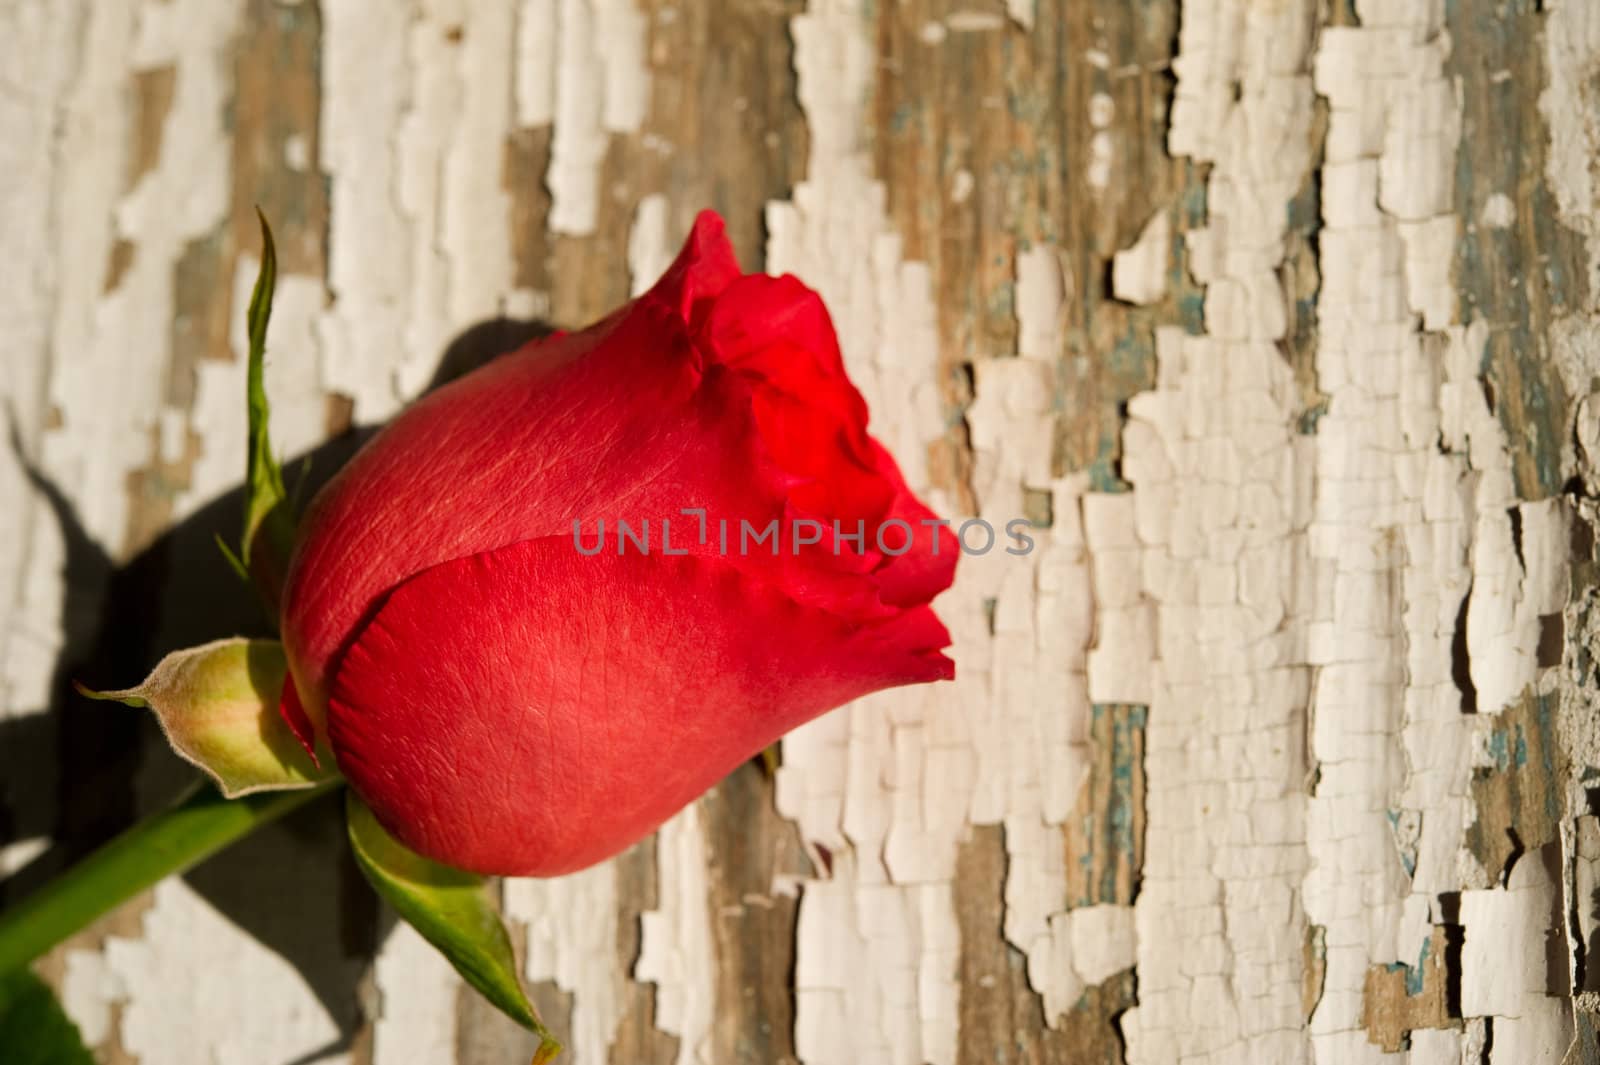 Image of a single red rose on rustic background